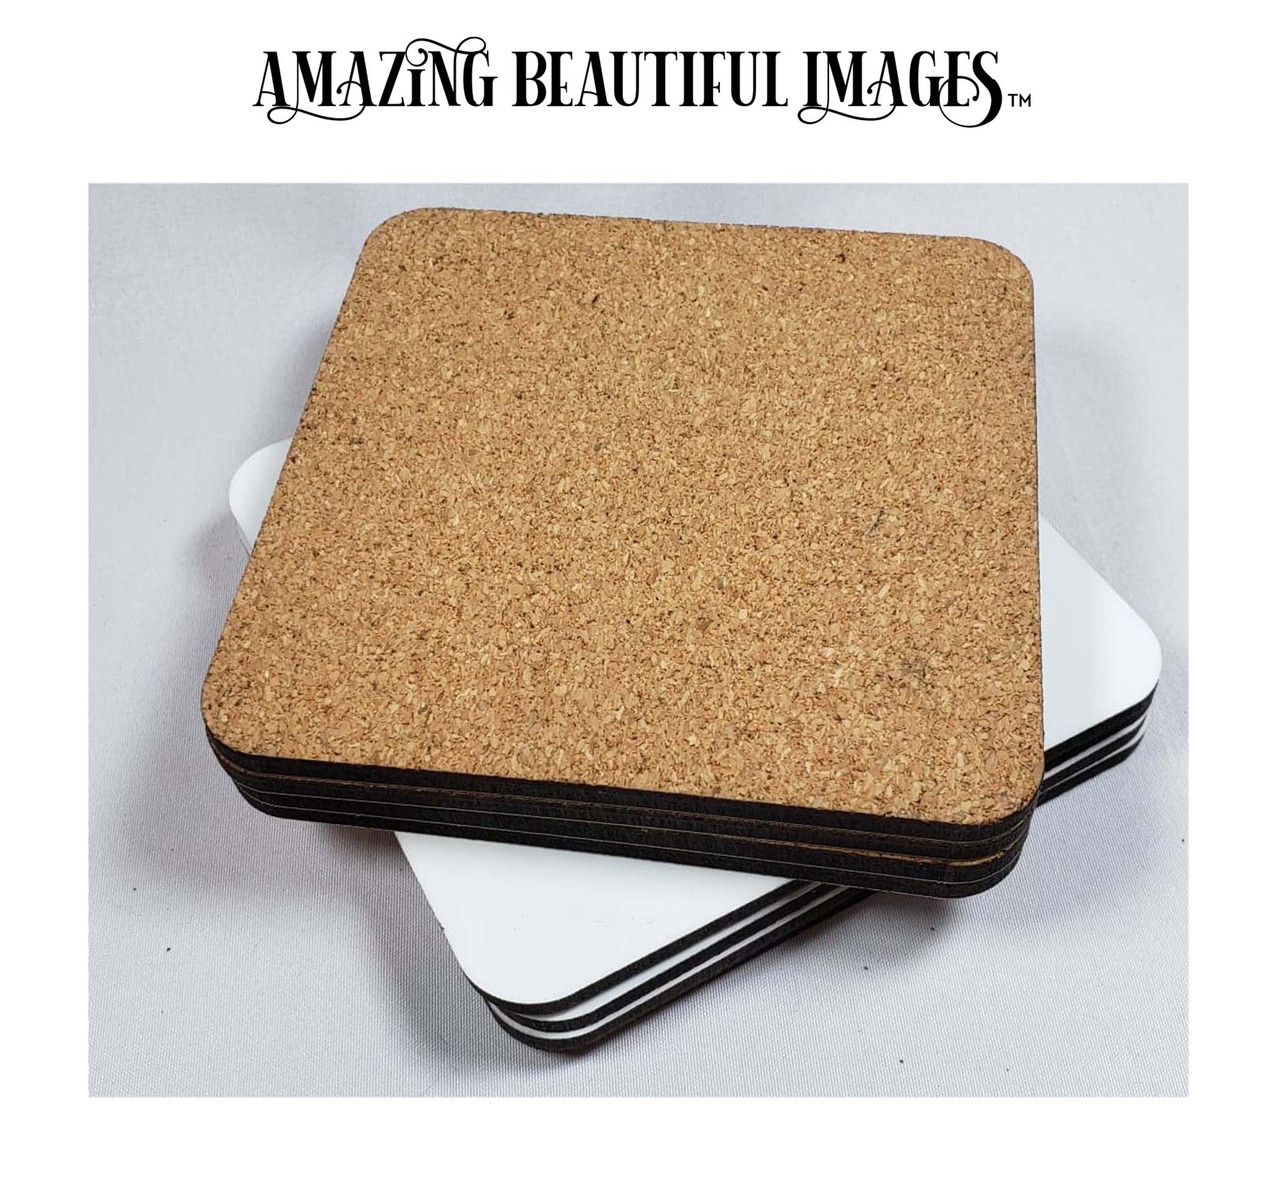 Sublimation Coaster Blanks - 3.75 Round with Cork Back. Pack of 10.